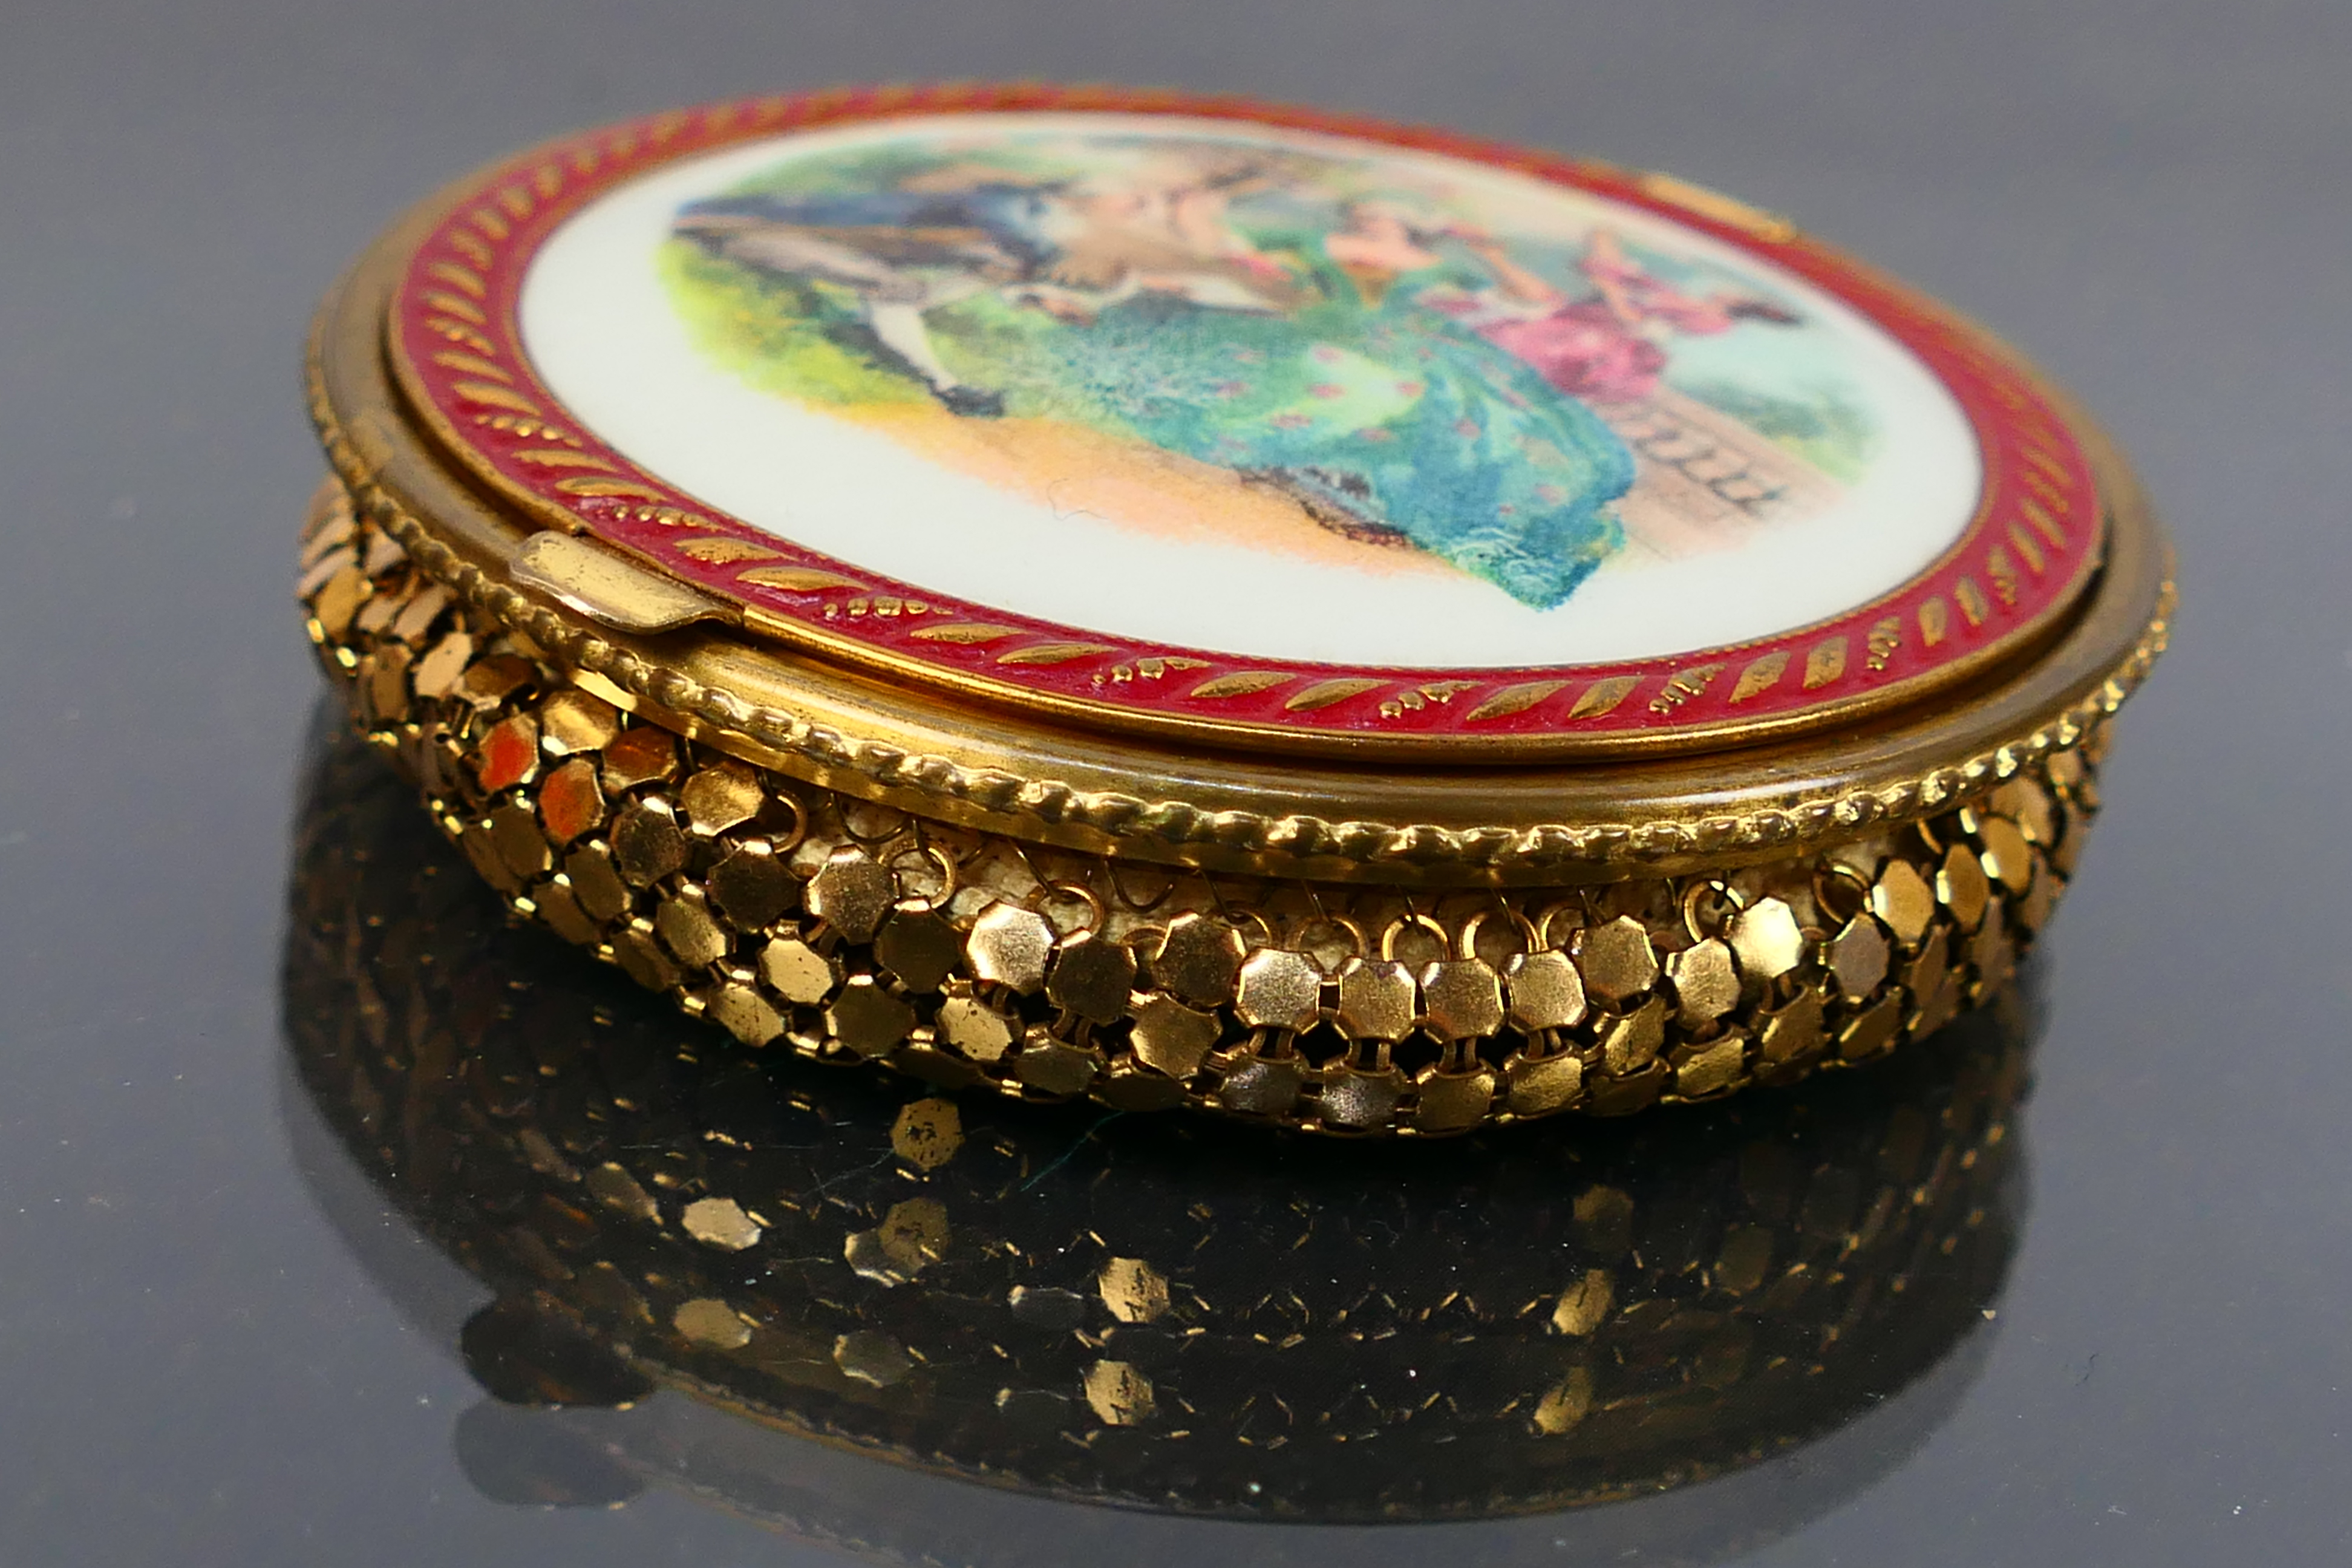 A vintage yellow metal enamel powder compact. Made in the U.S.A. - Image 4 of 7